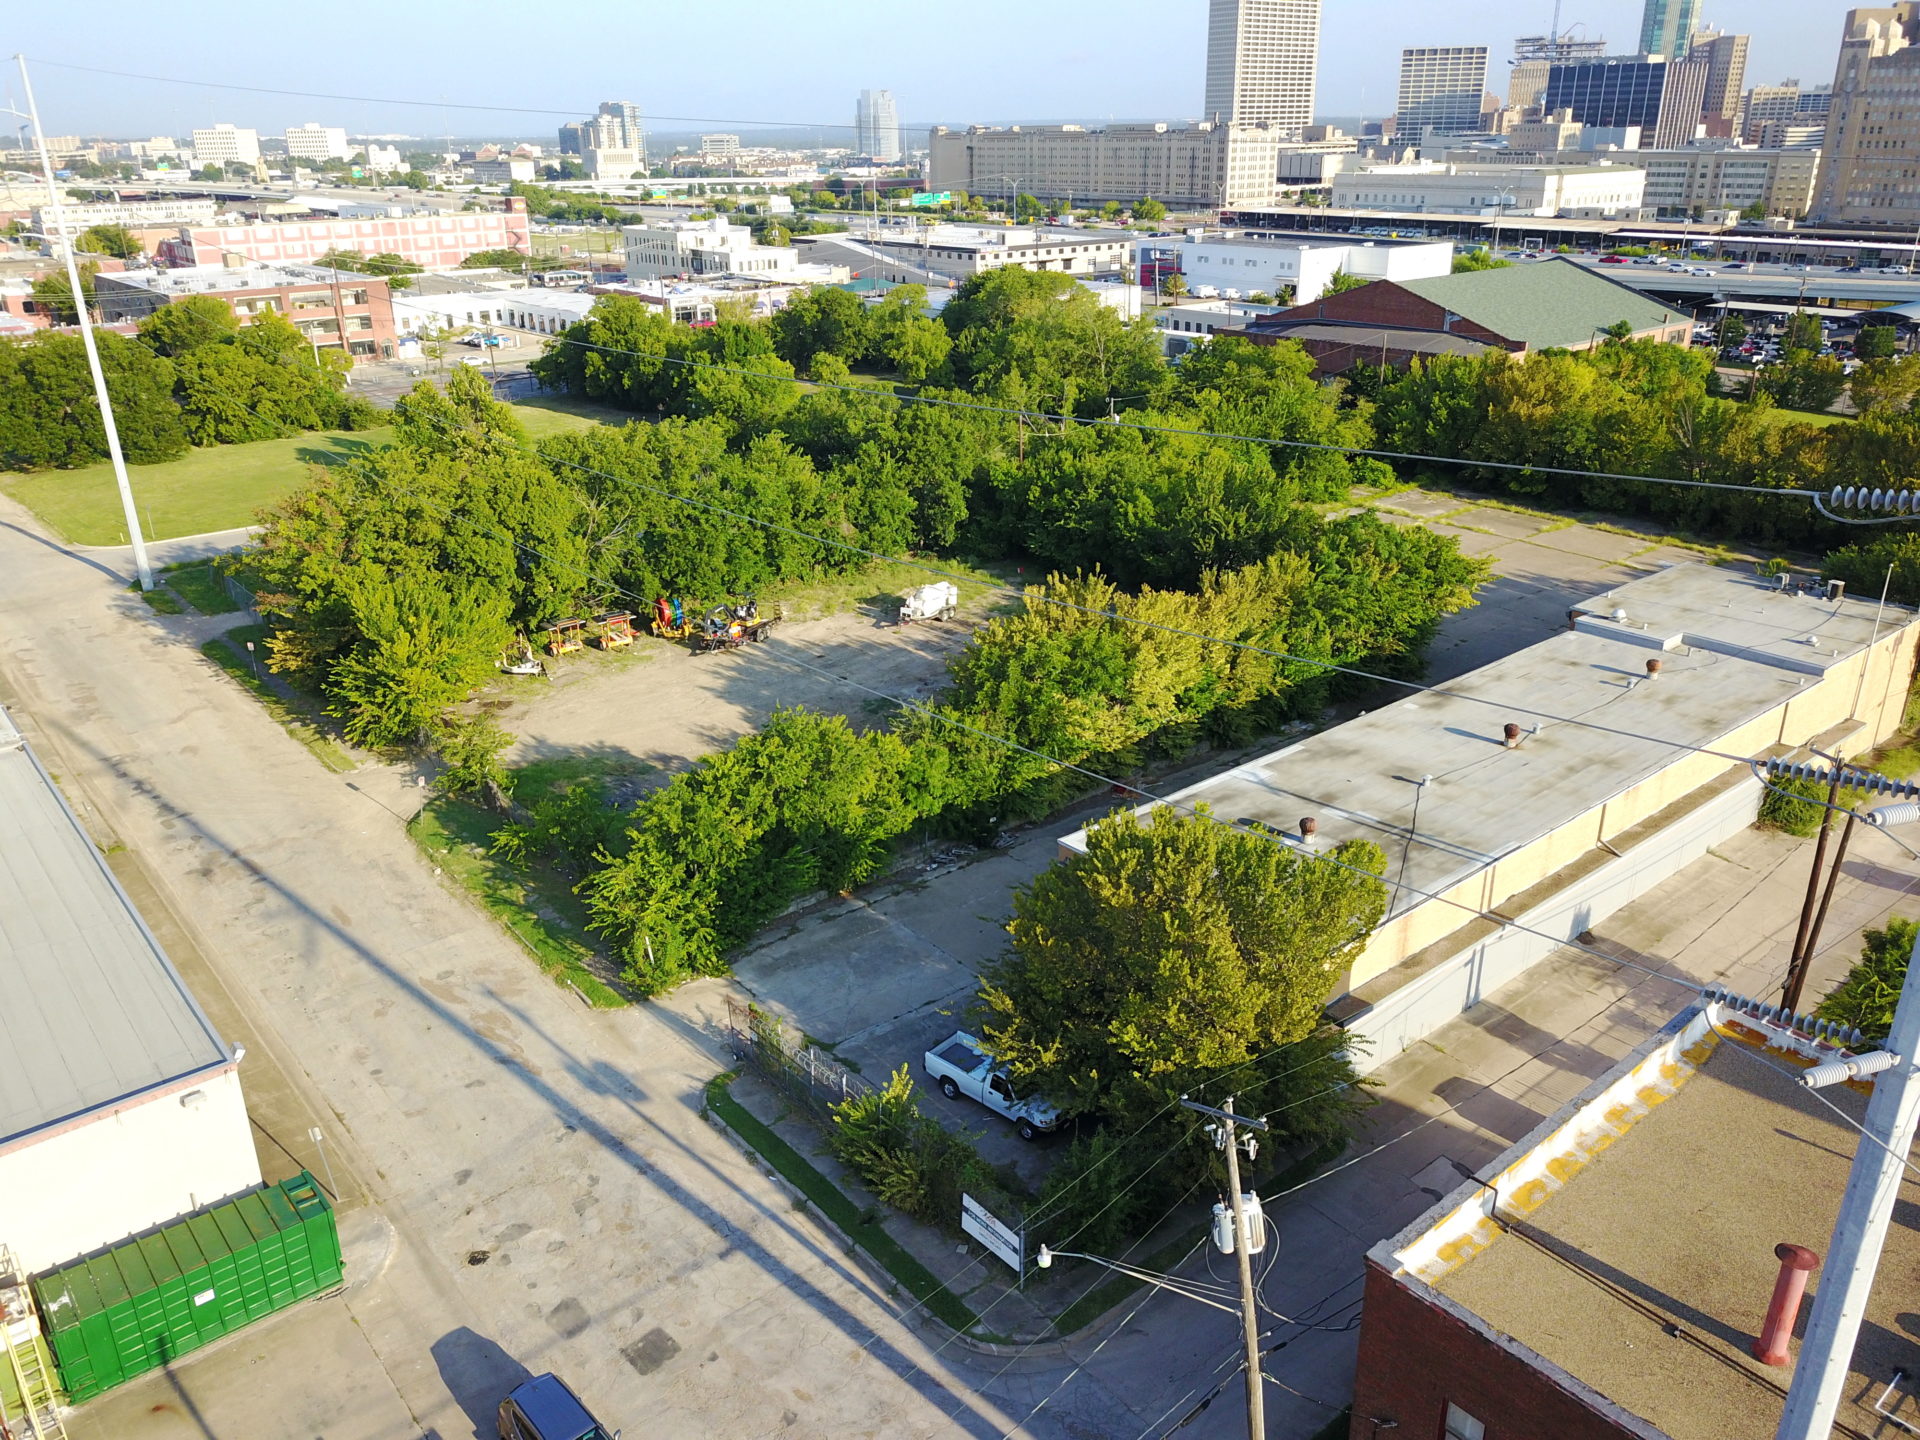 Aerial view of a building with a brown roof, surrounded by multiple green trees, power lines, and an adjacent street